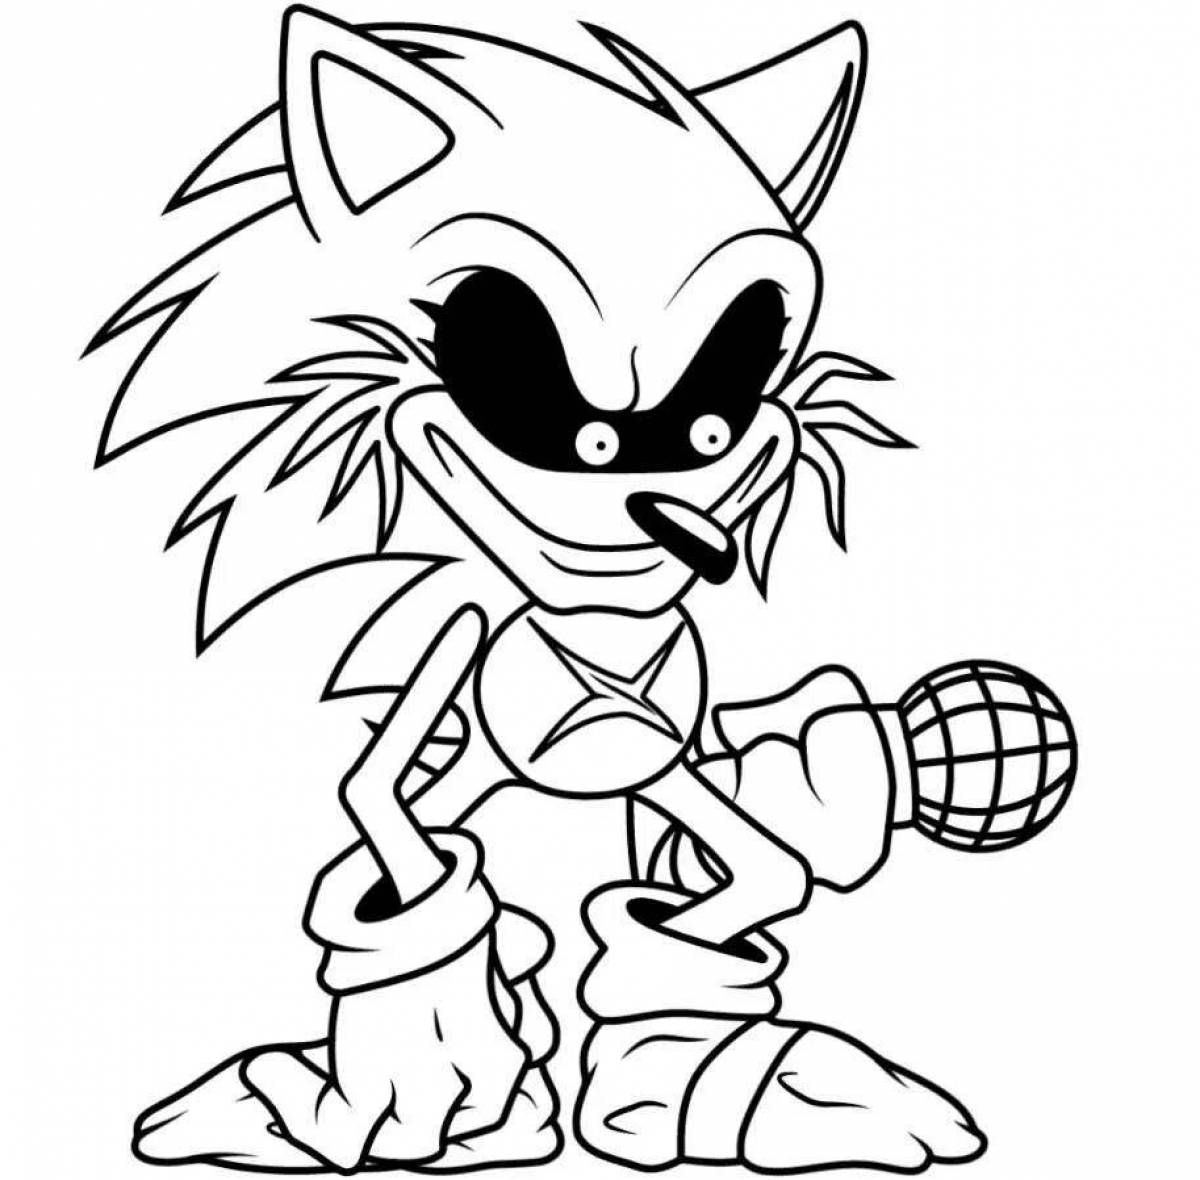 Coloring book evil sonic - angry